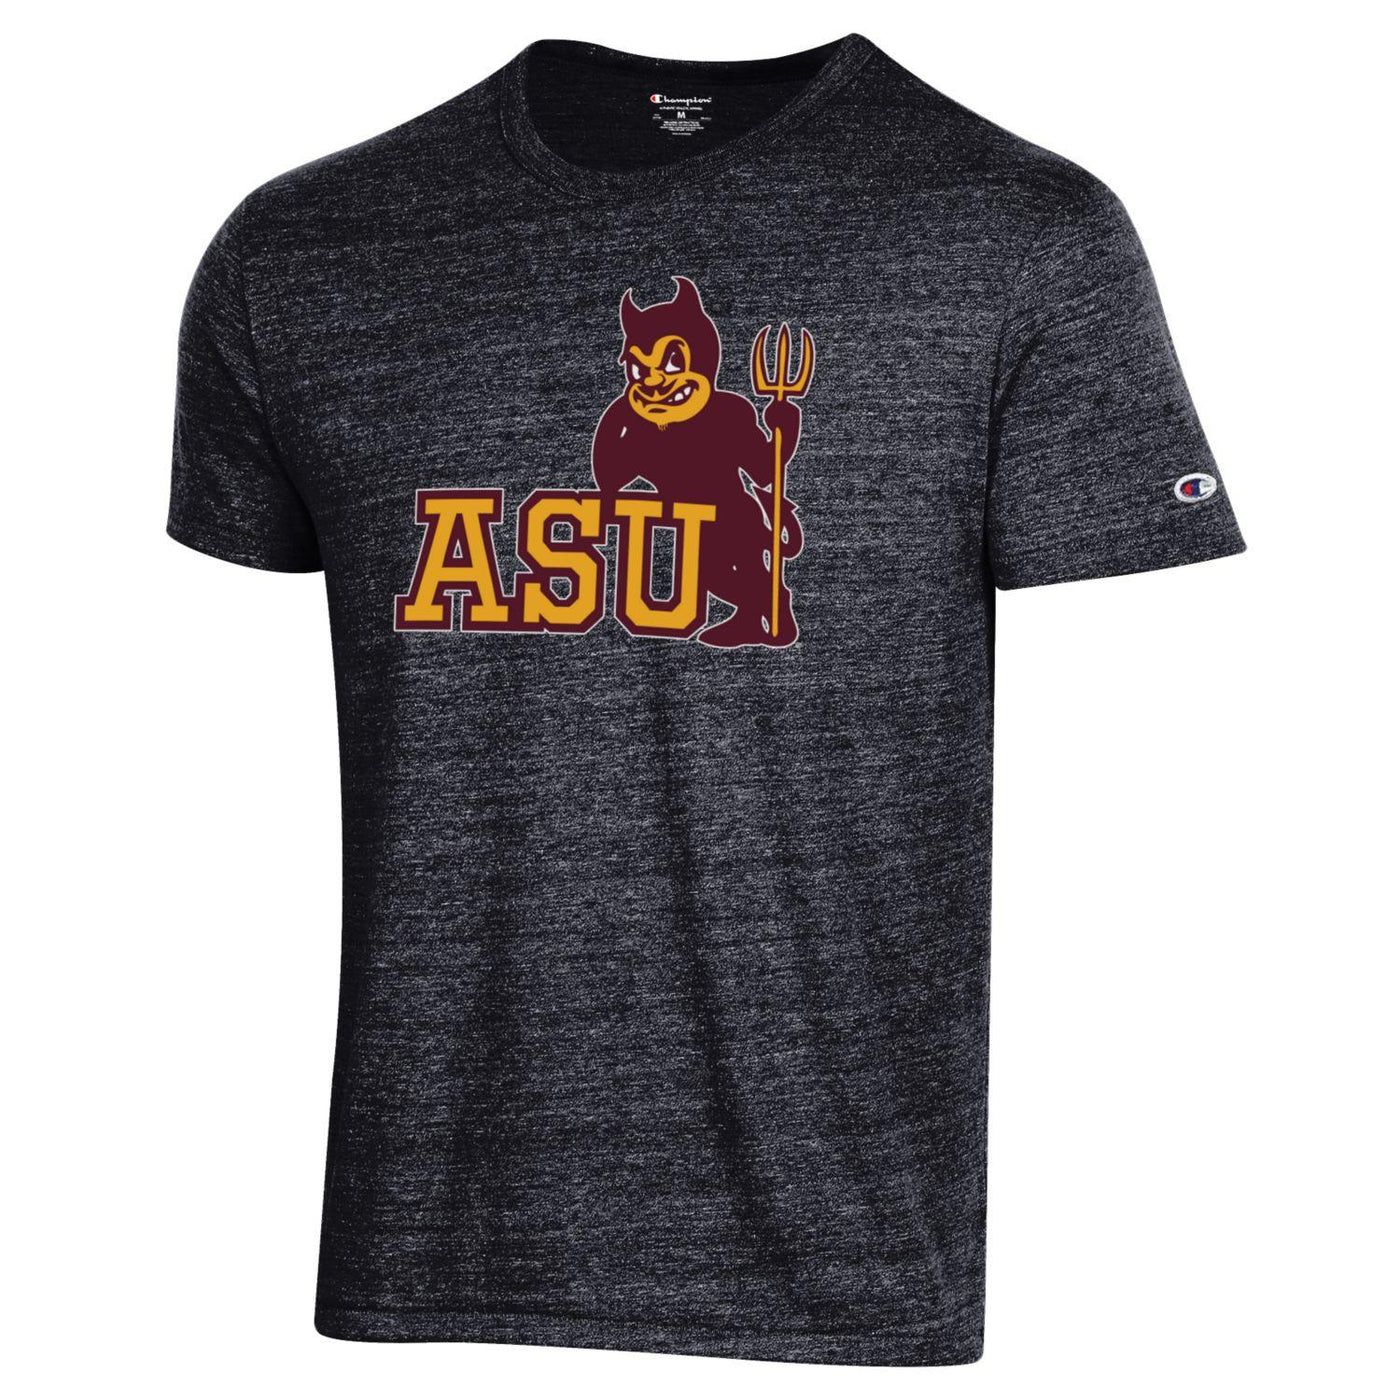 ASU gray tee with 'ASU' letters and Sparky leaning over the 'U'